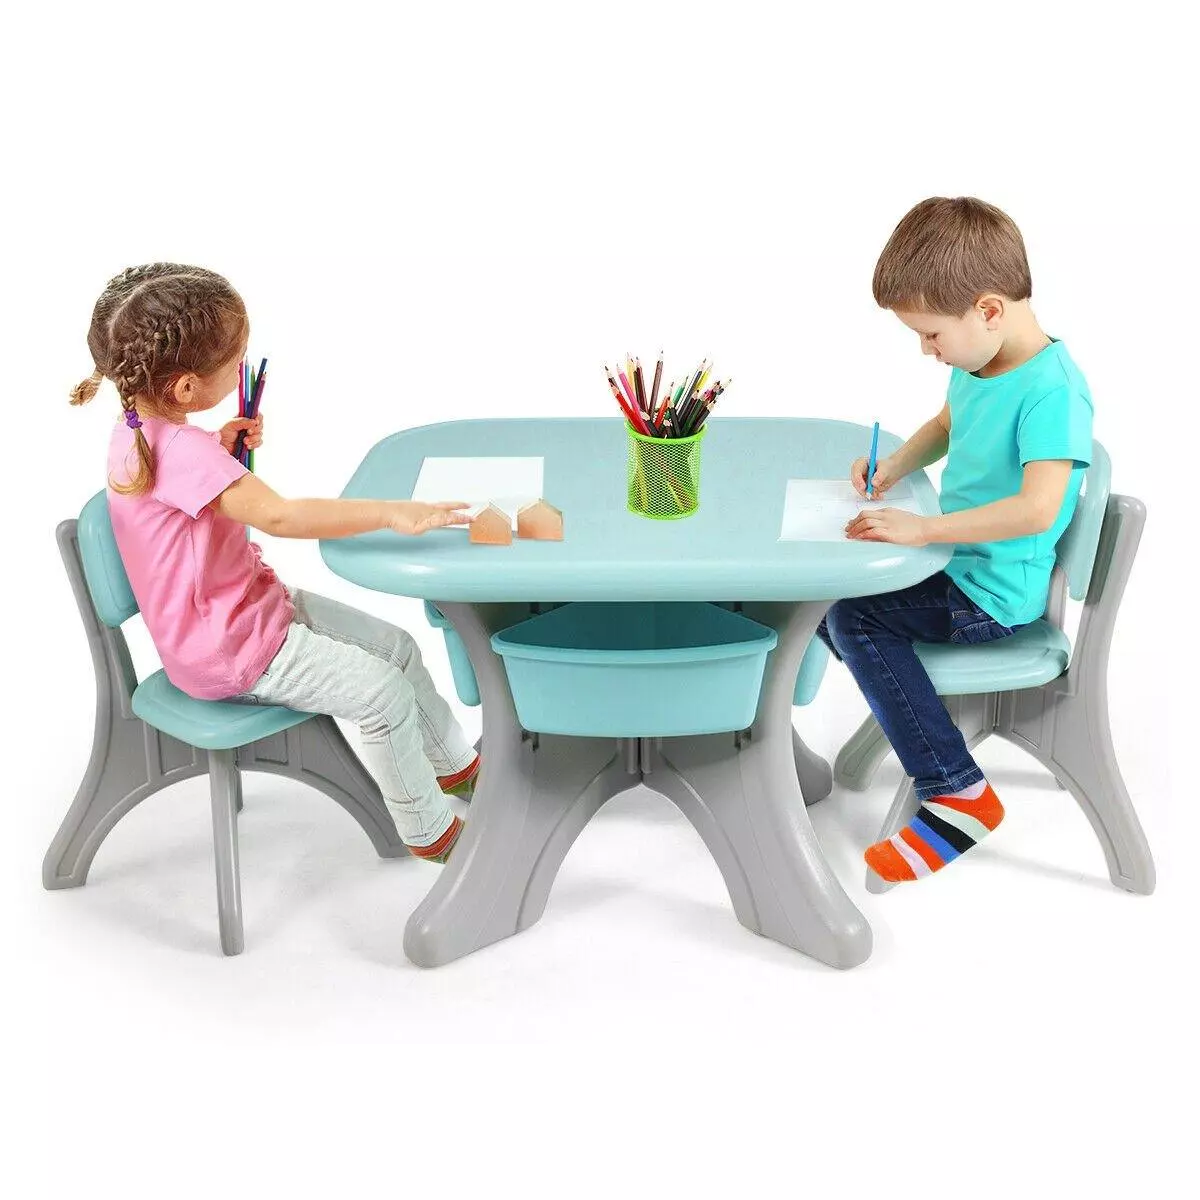 Costzon Kids Table And Chair Set